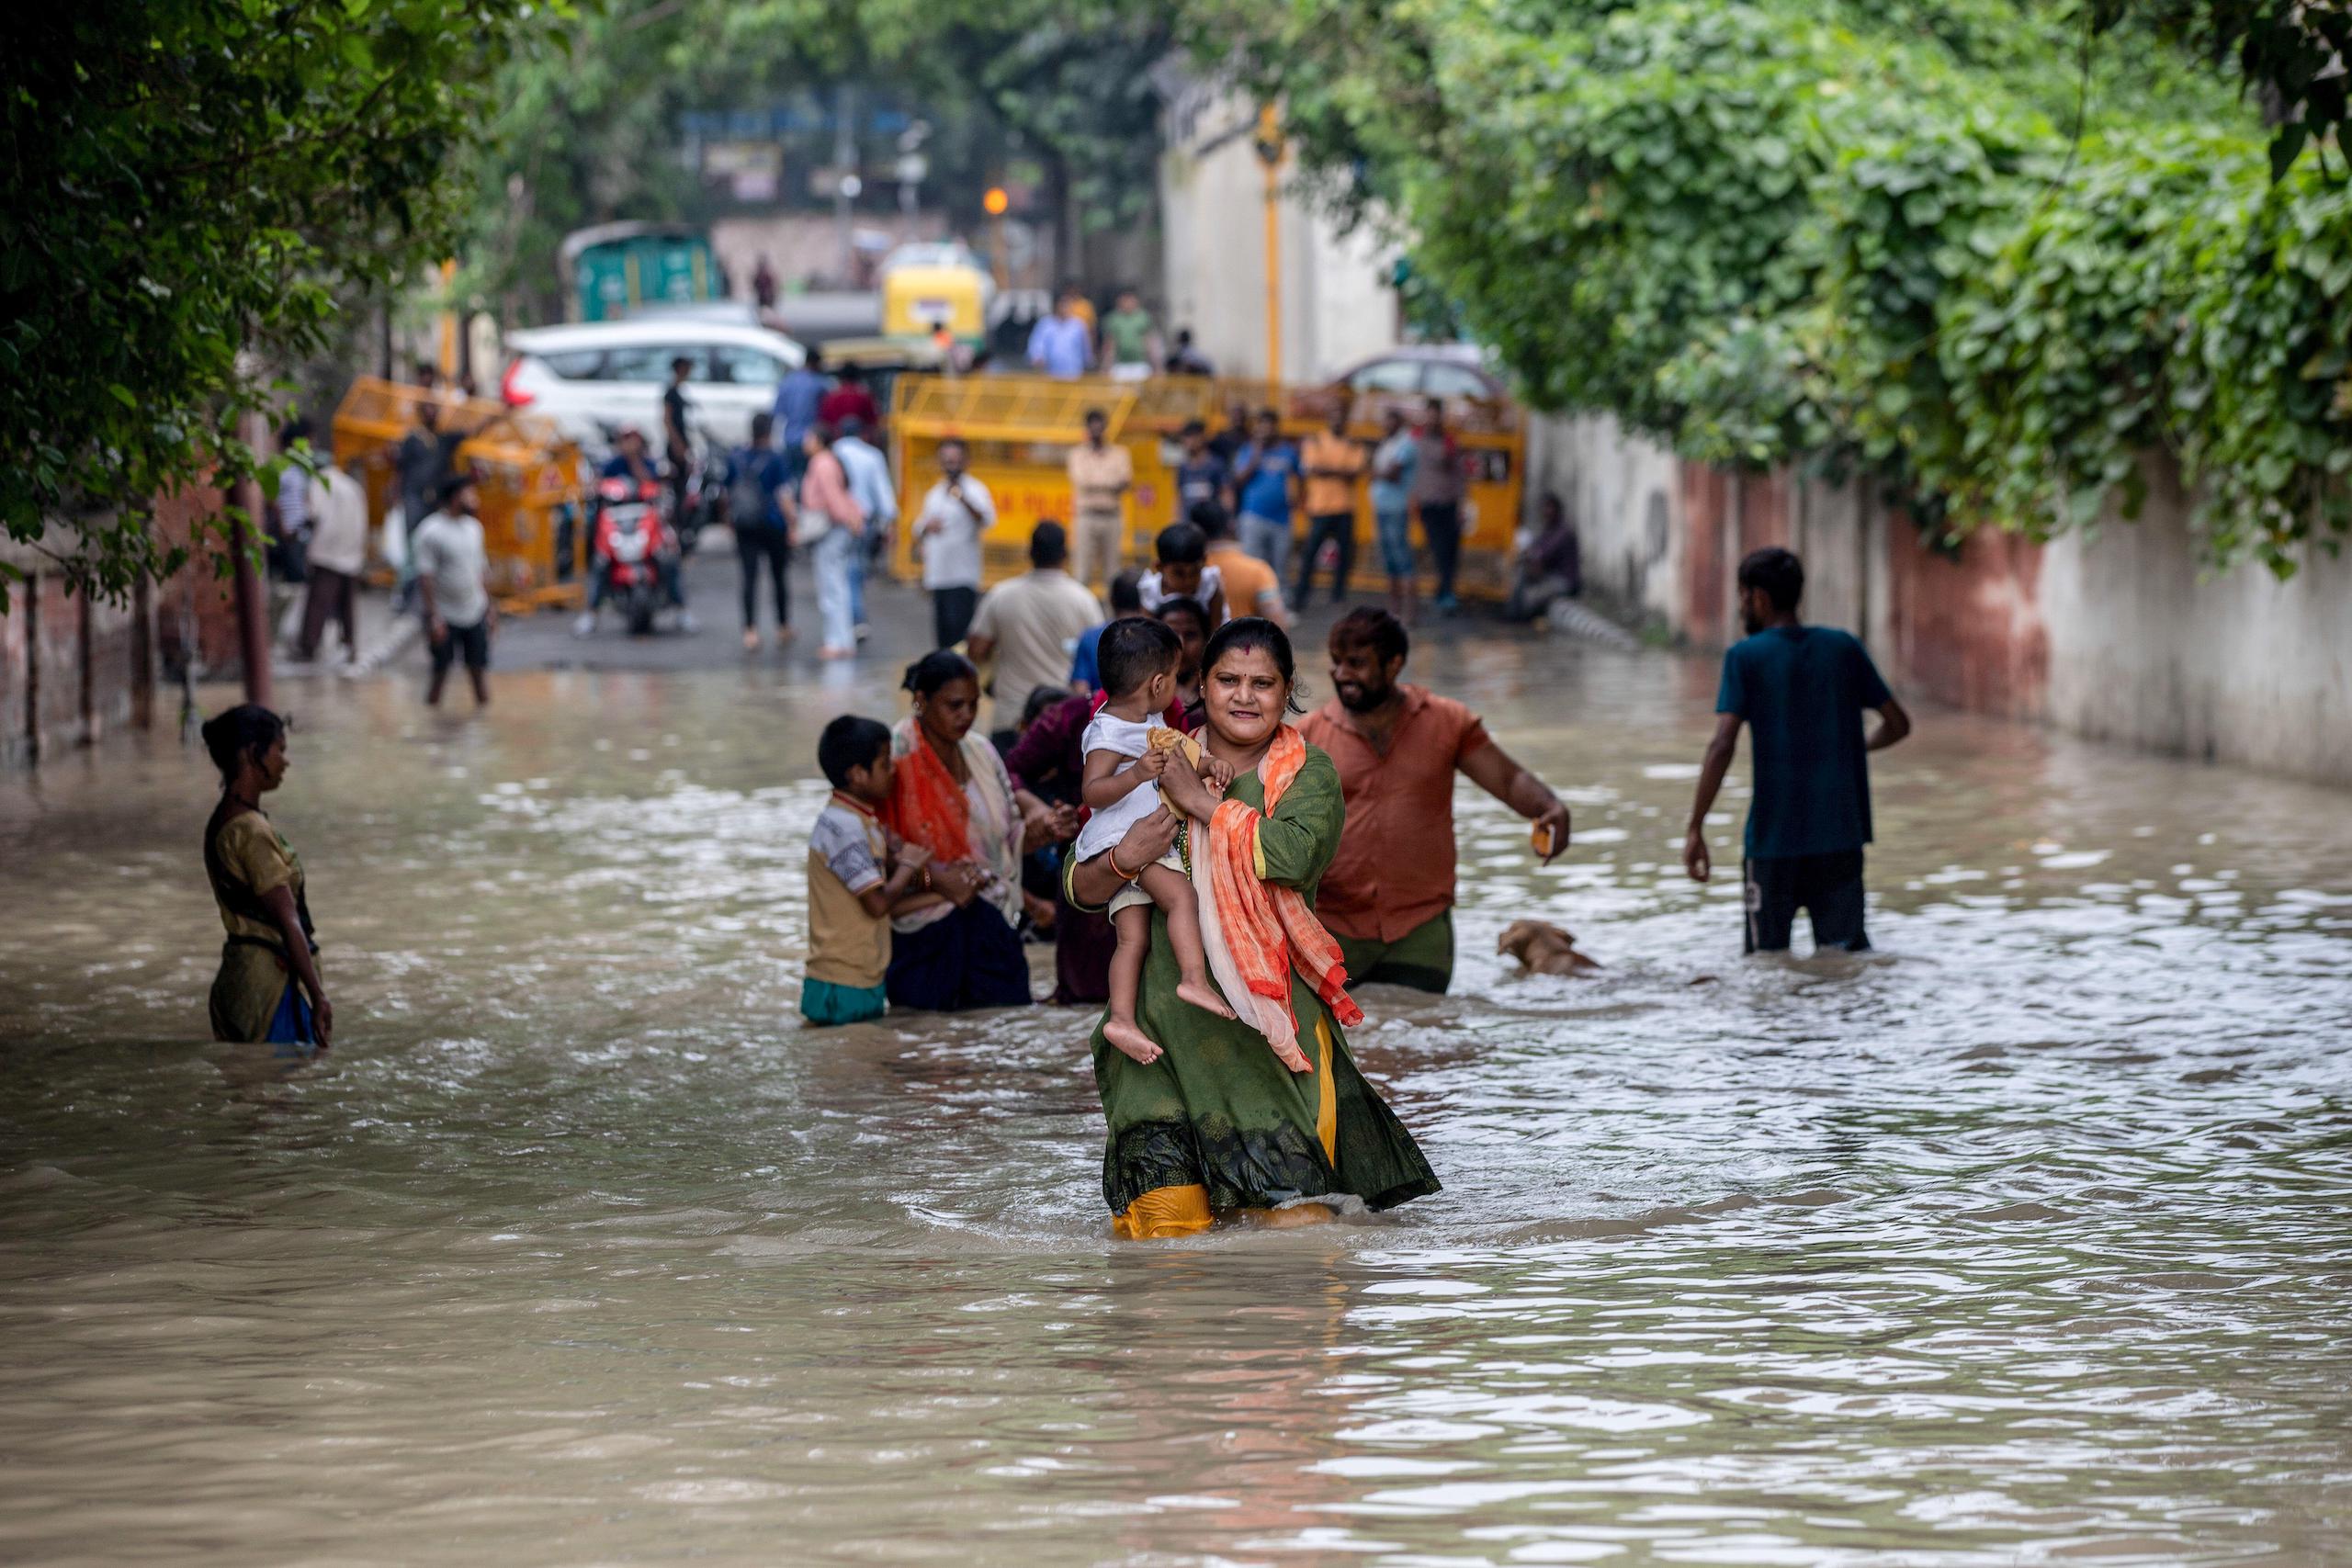 A woman holding a baby in her arm wades through a flooded road in New Delhi